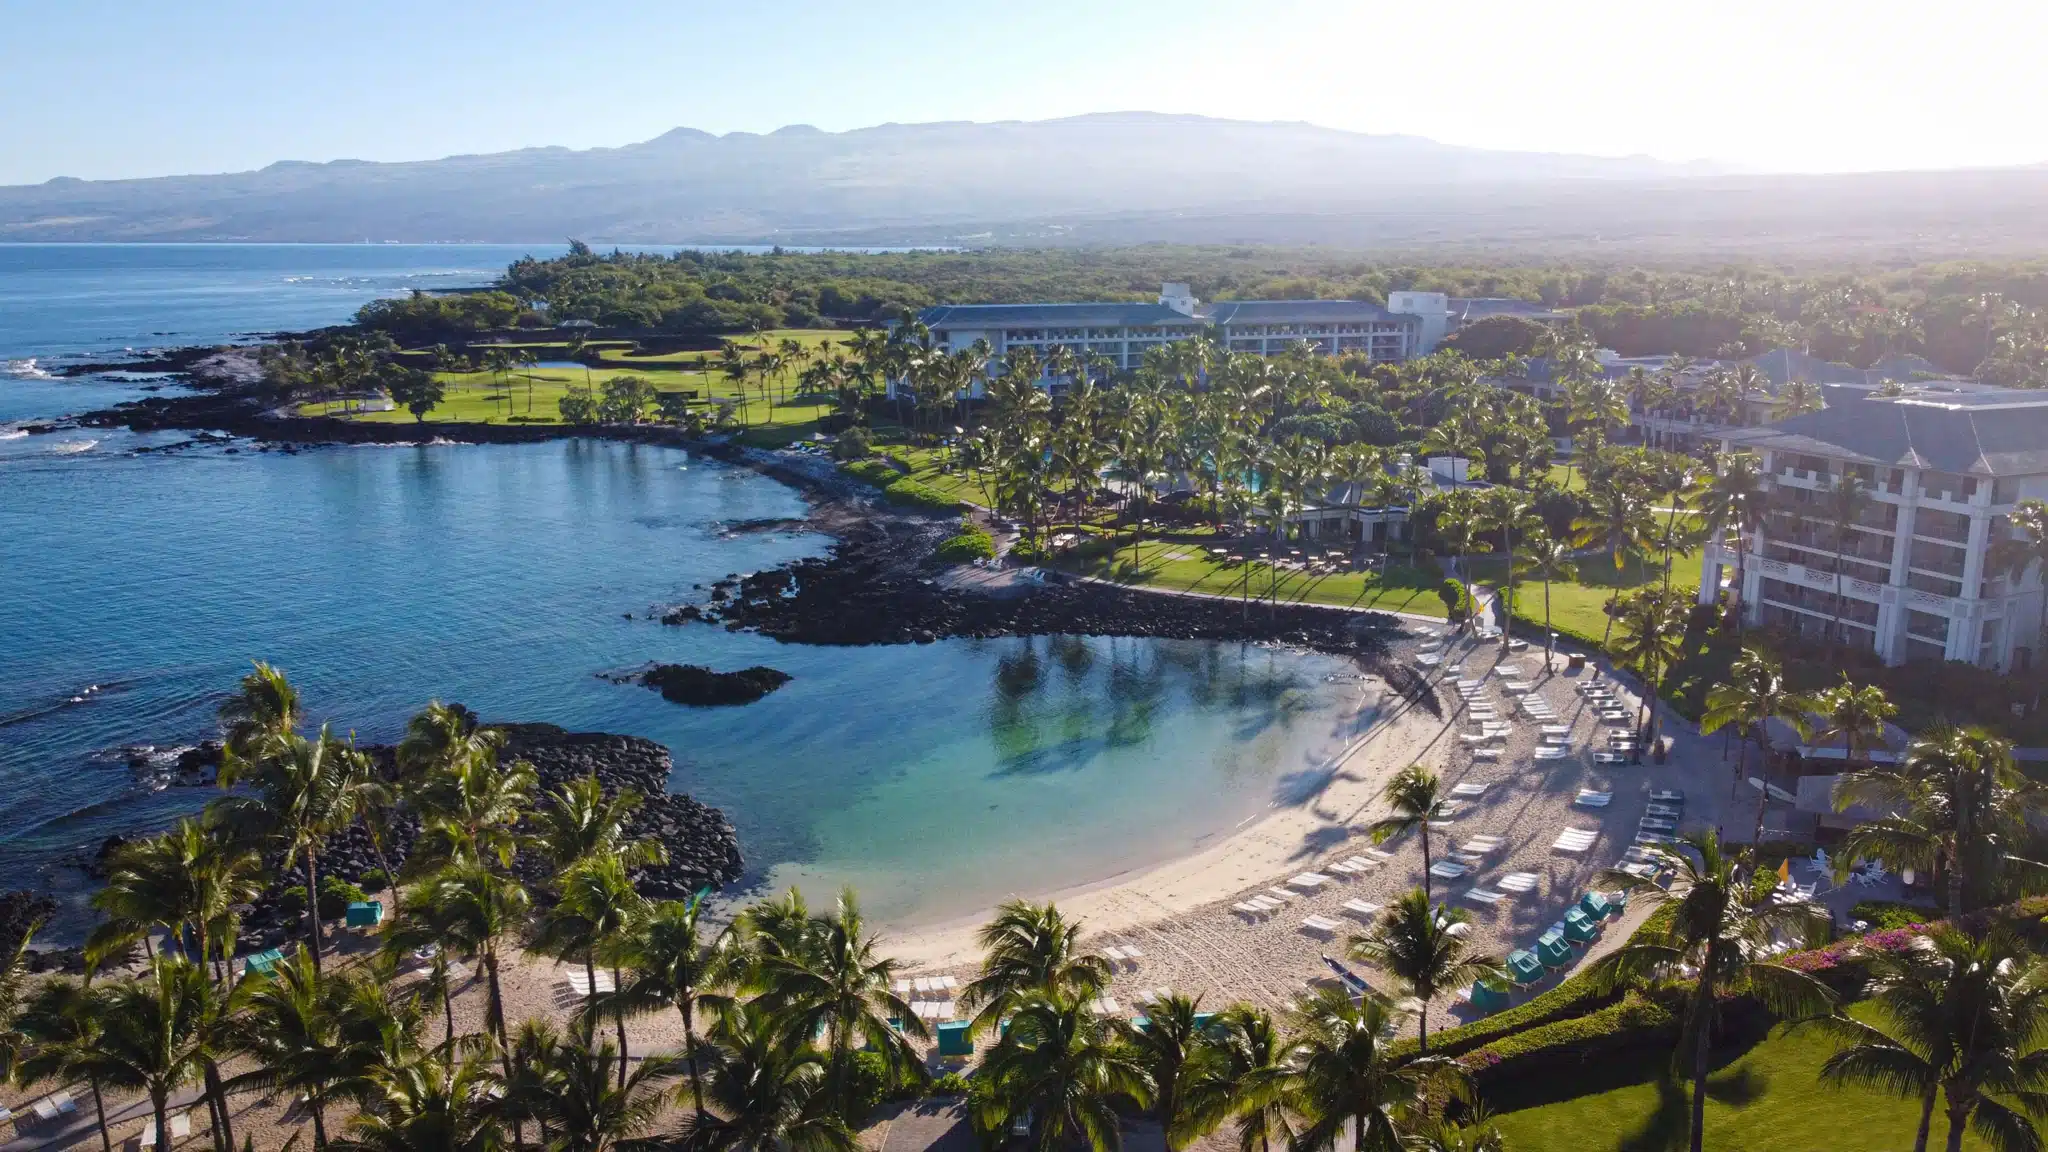 Fairmont Orchid is a Hotel located in the city of Kamuela on Big Island, Hawaii